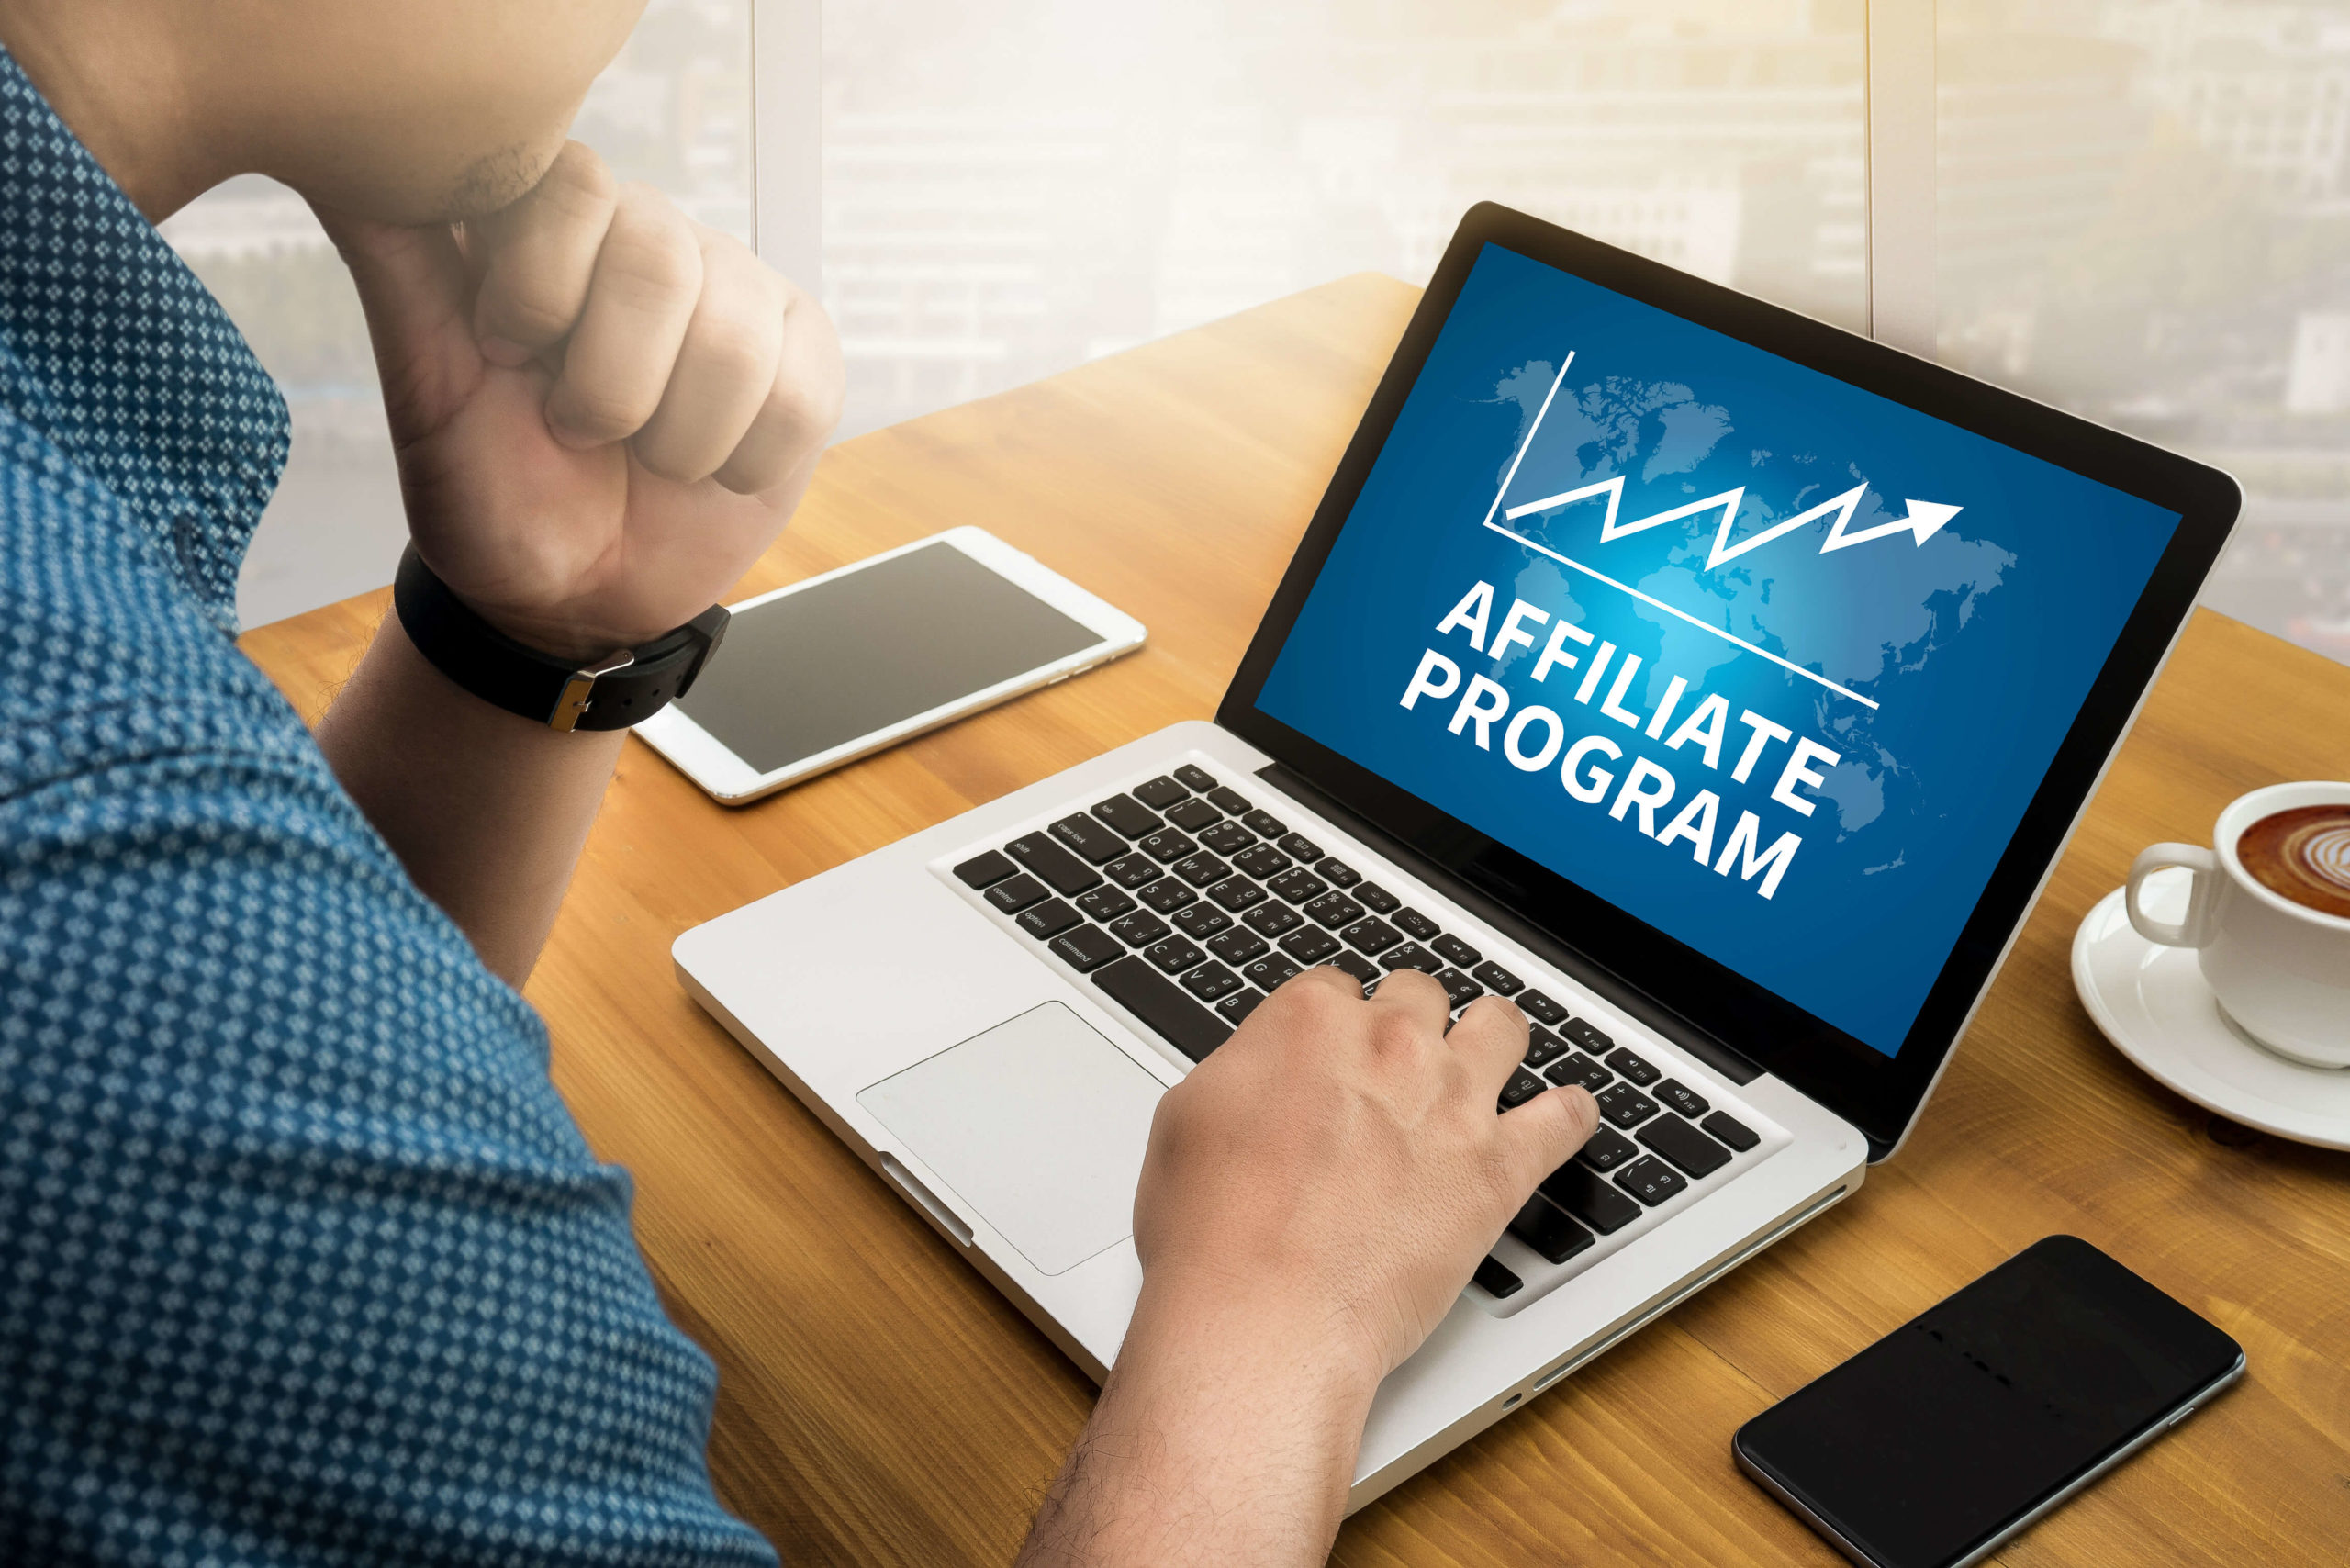 11-Best-Affiliate-Programs-for-Beginners-to-Make-Money-Empire-Flippers-scaled